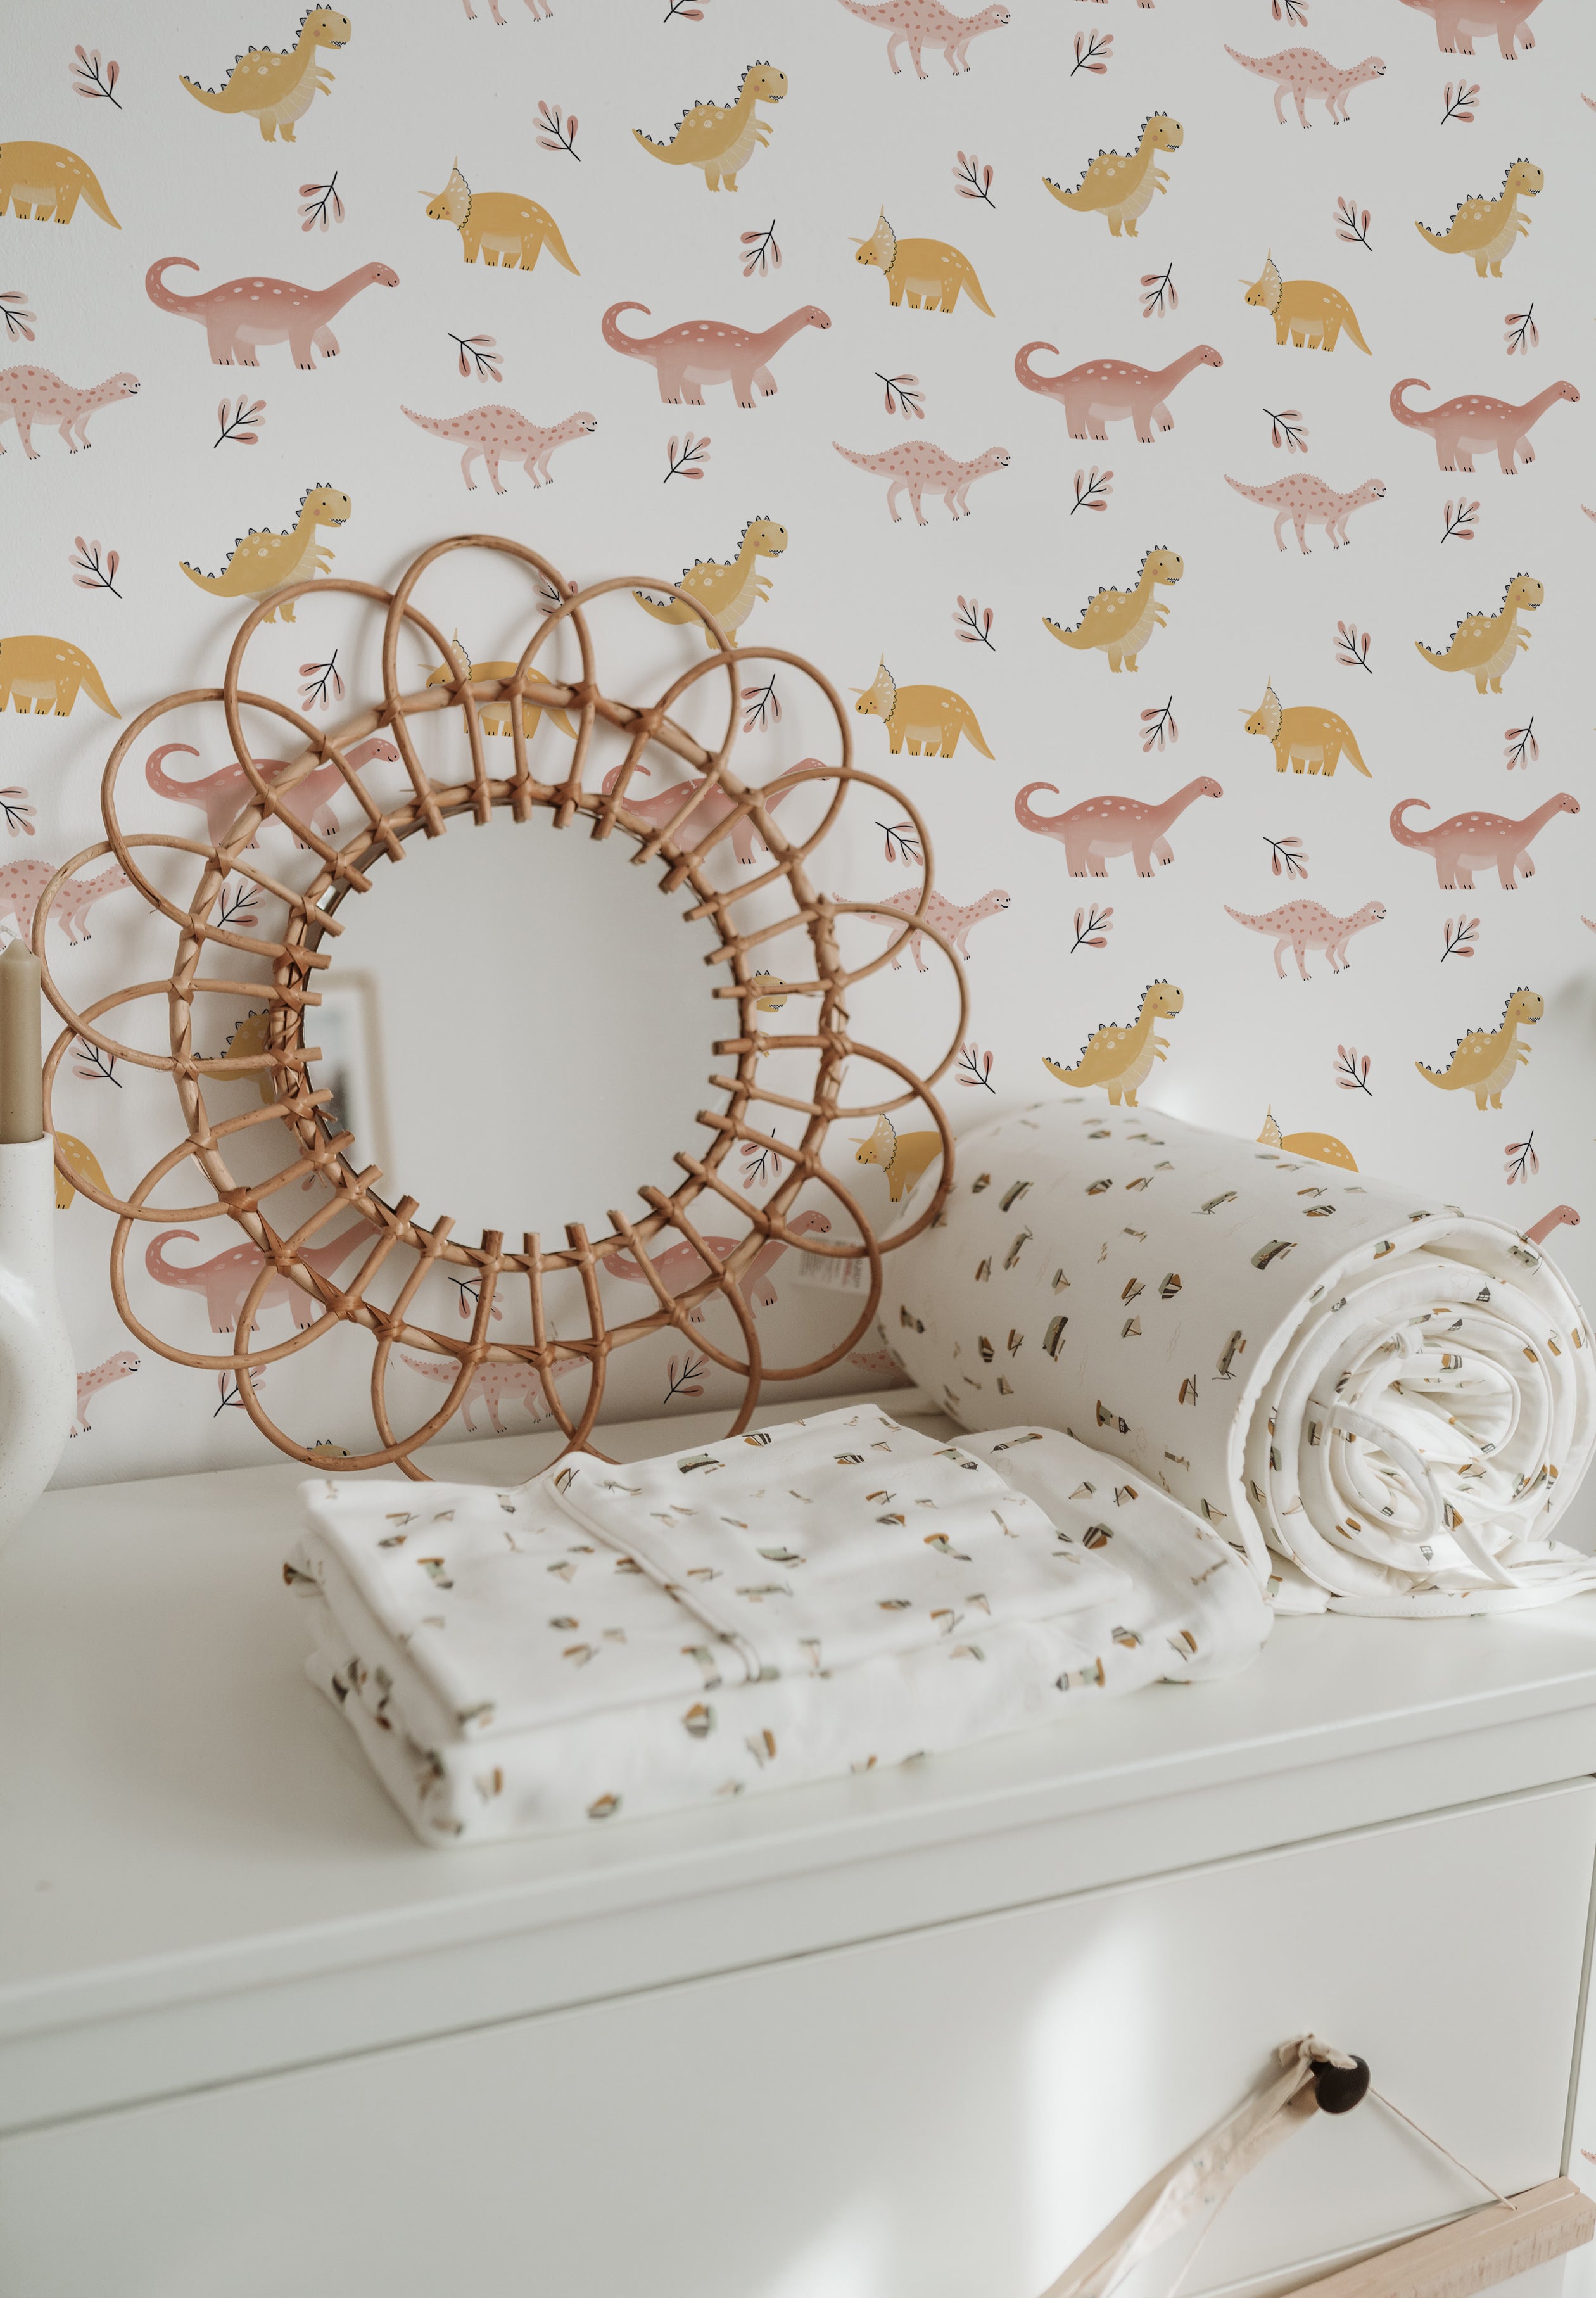 A child's room setup showcasing the "Dino Days Wallpaper III" on one wall, with coordinating decor. The room includes a white dresser topped with a decorative rattan mirror and rolled-up dinosaur-themed wallpapers, complementing the playful and colorful dinosaur patterns on the wall.